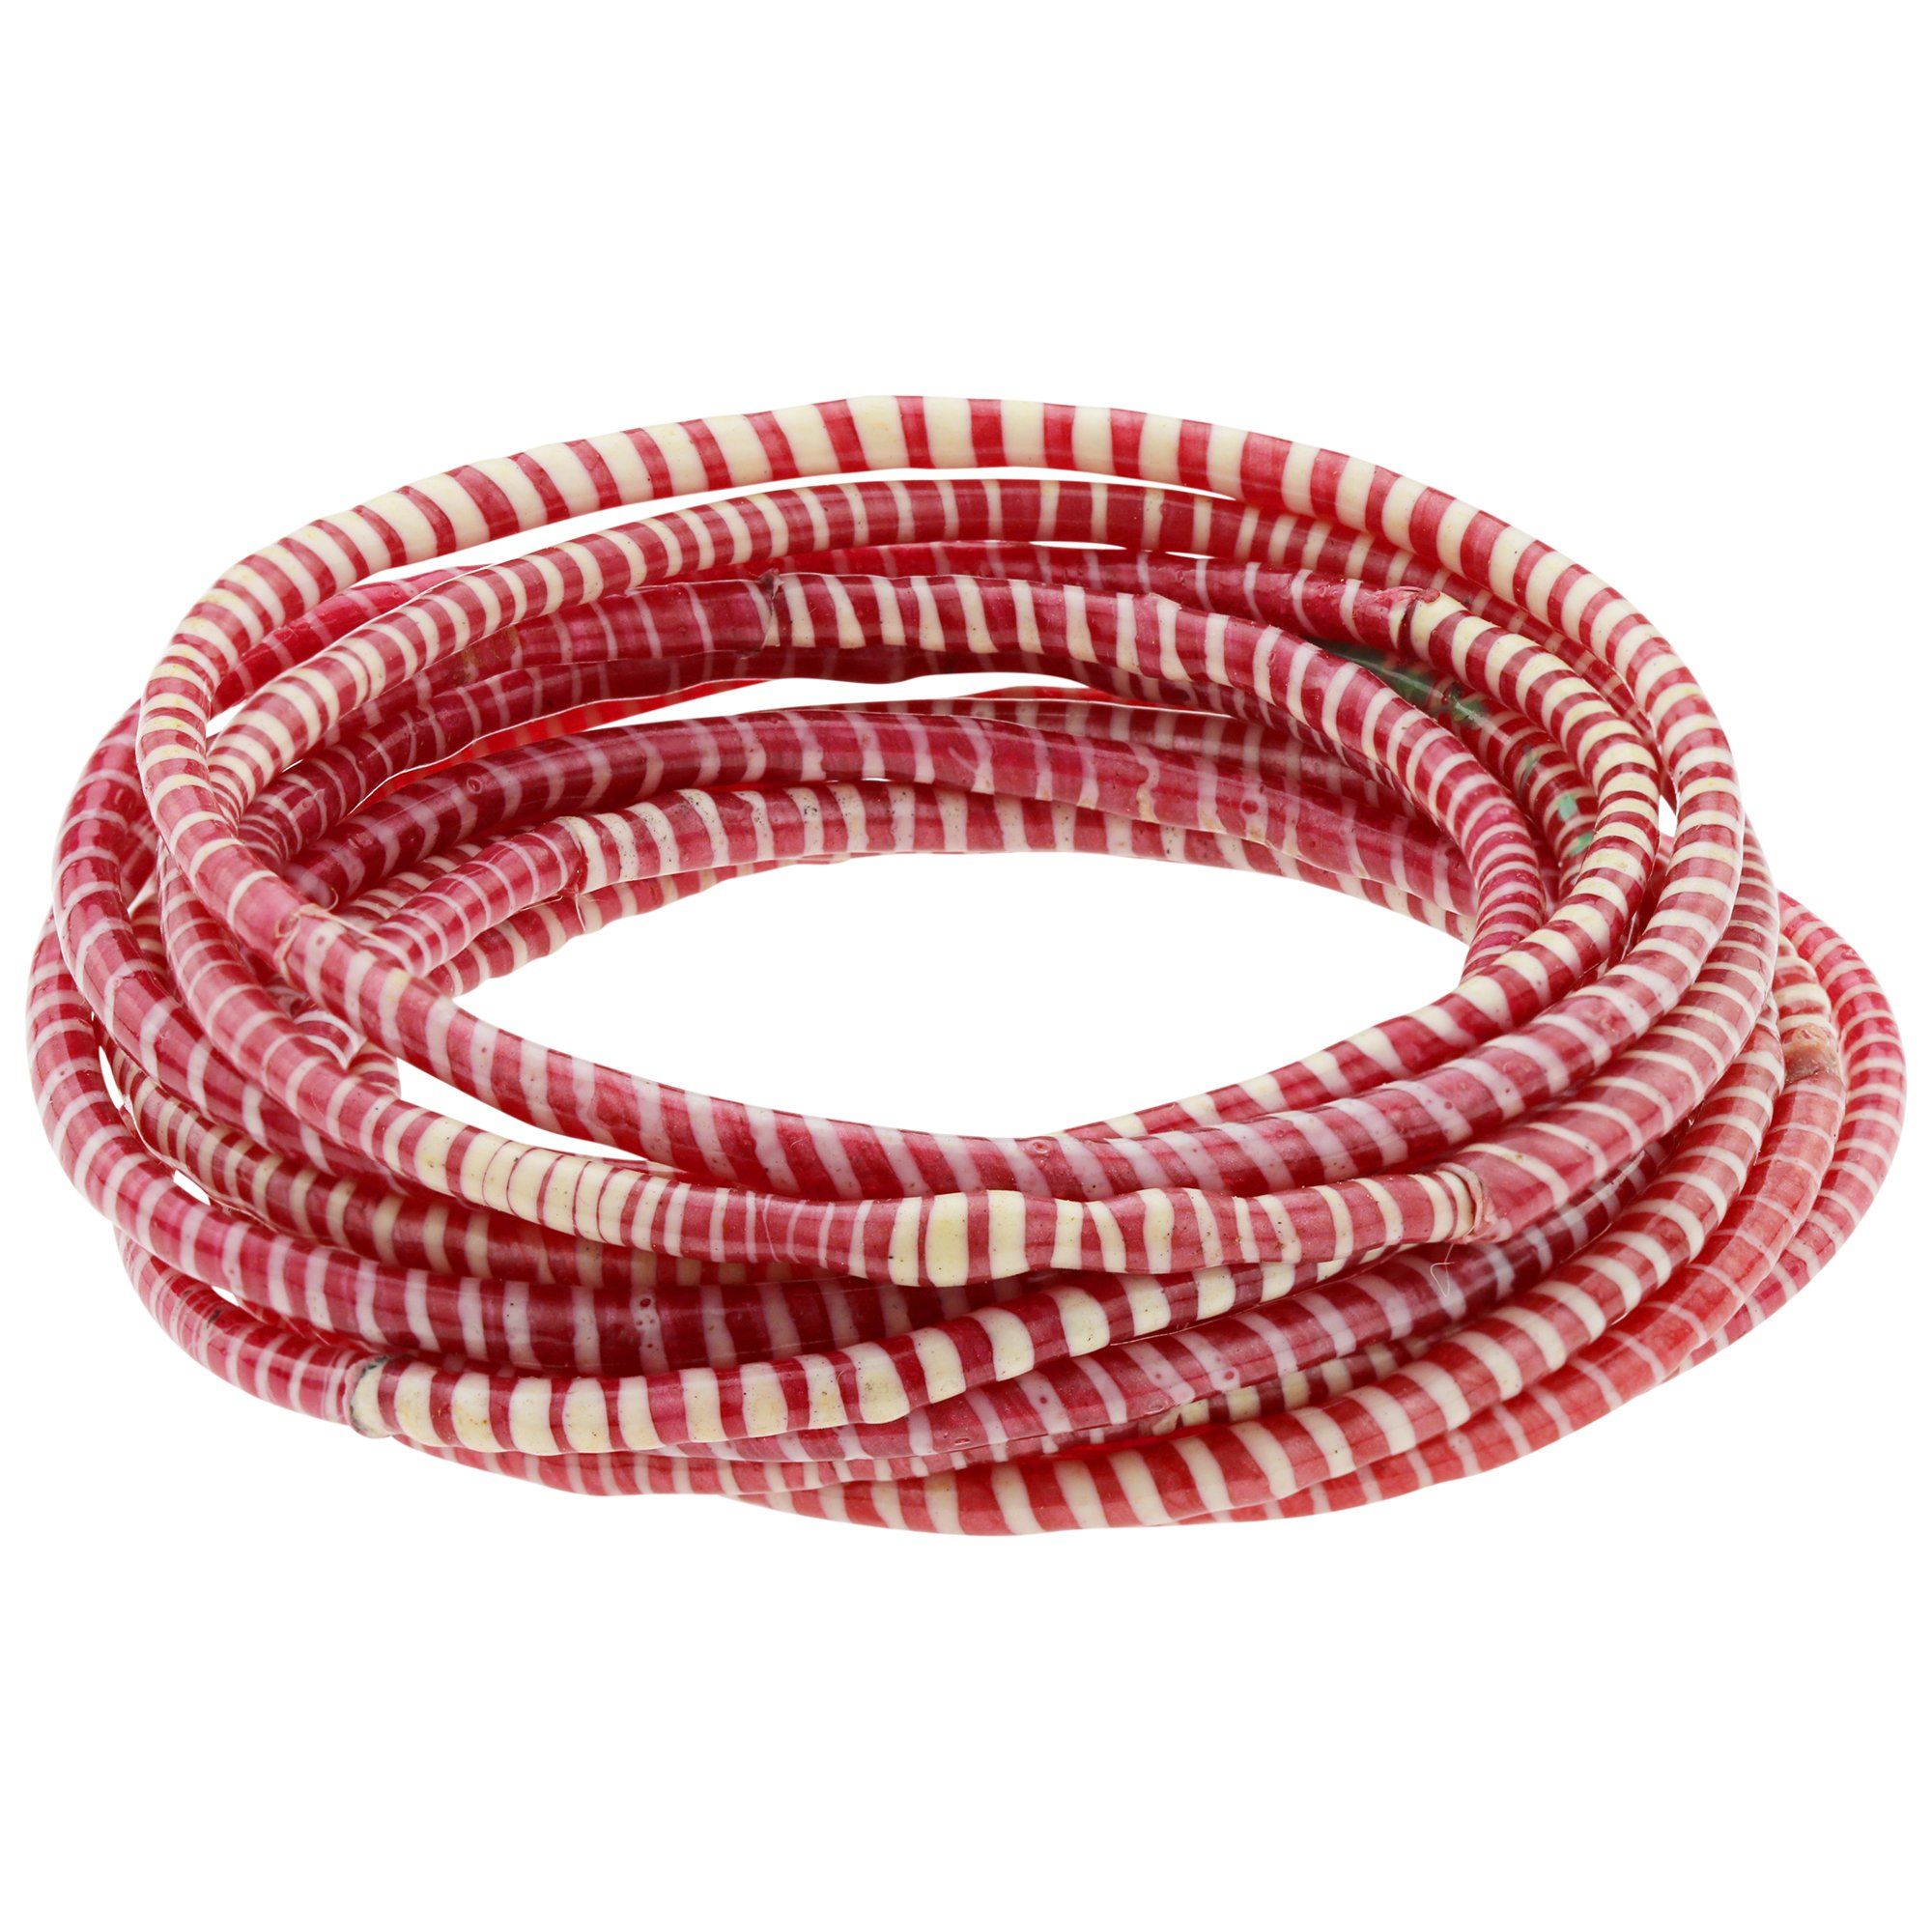 Colors Of Mali Recycled Bracelet - Red